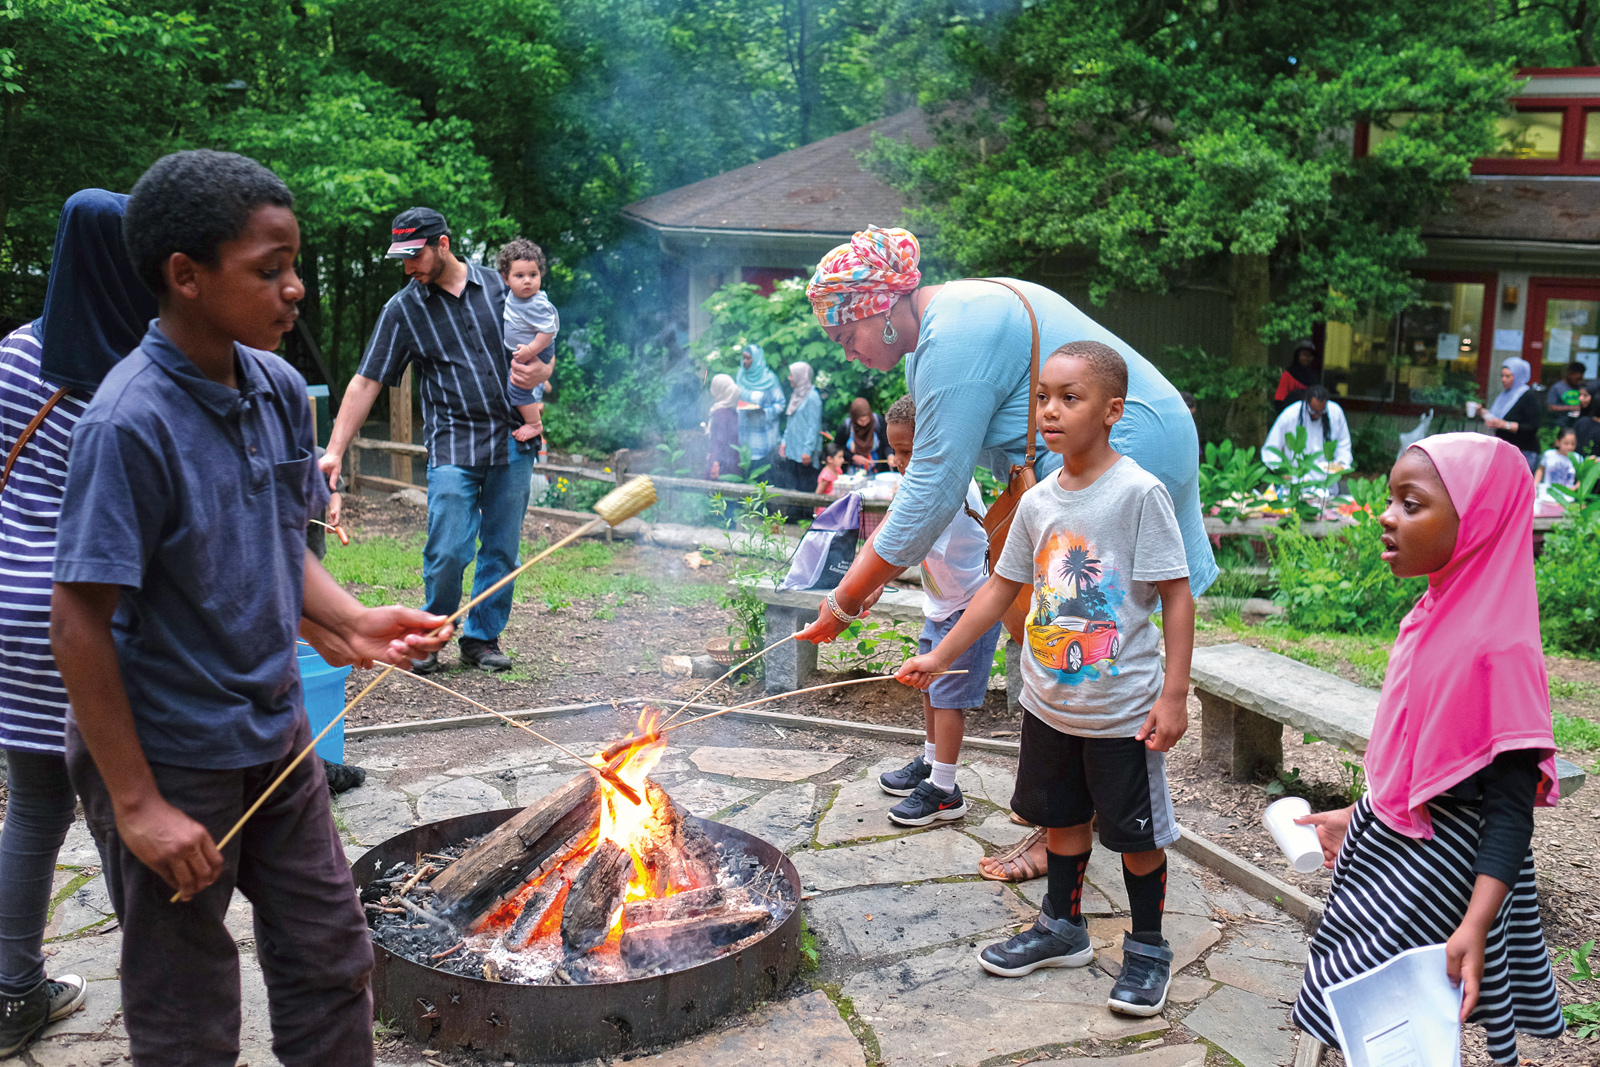 On a warm June evening, people gathered at a park in Bethesda, Maryland, for a community potluck dinner welcoming the start of Ramadan.